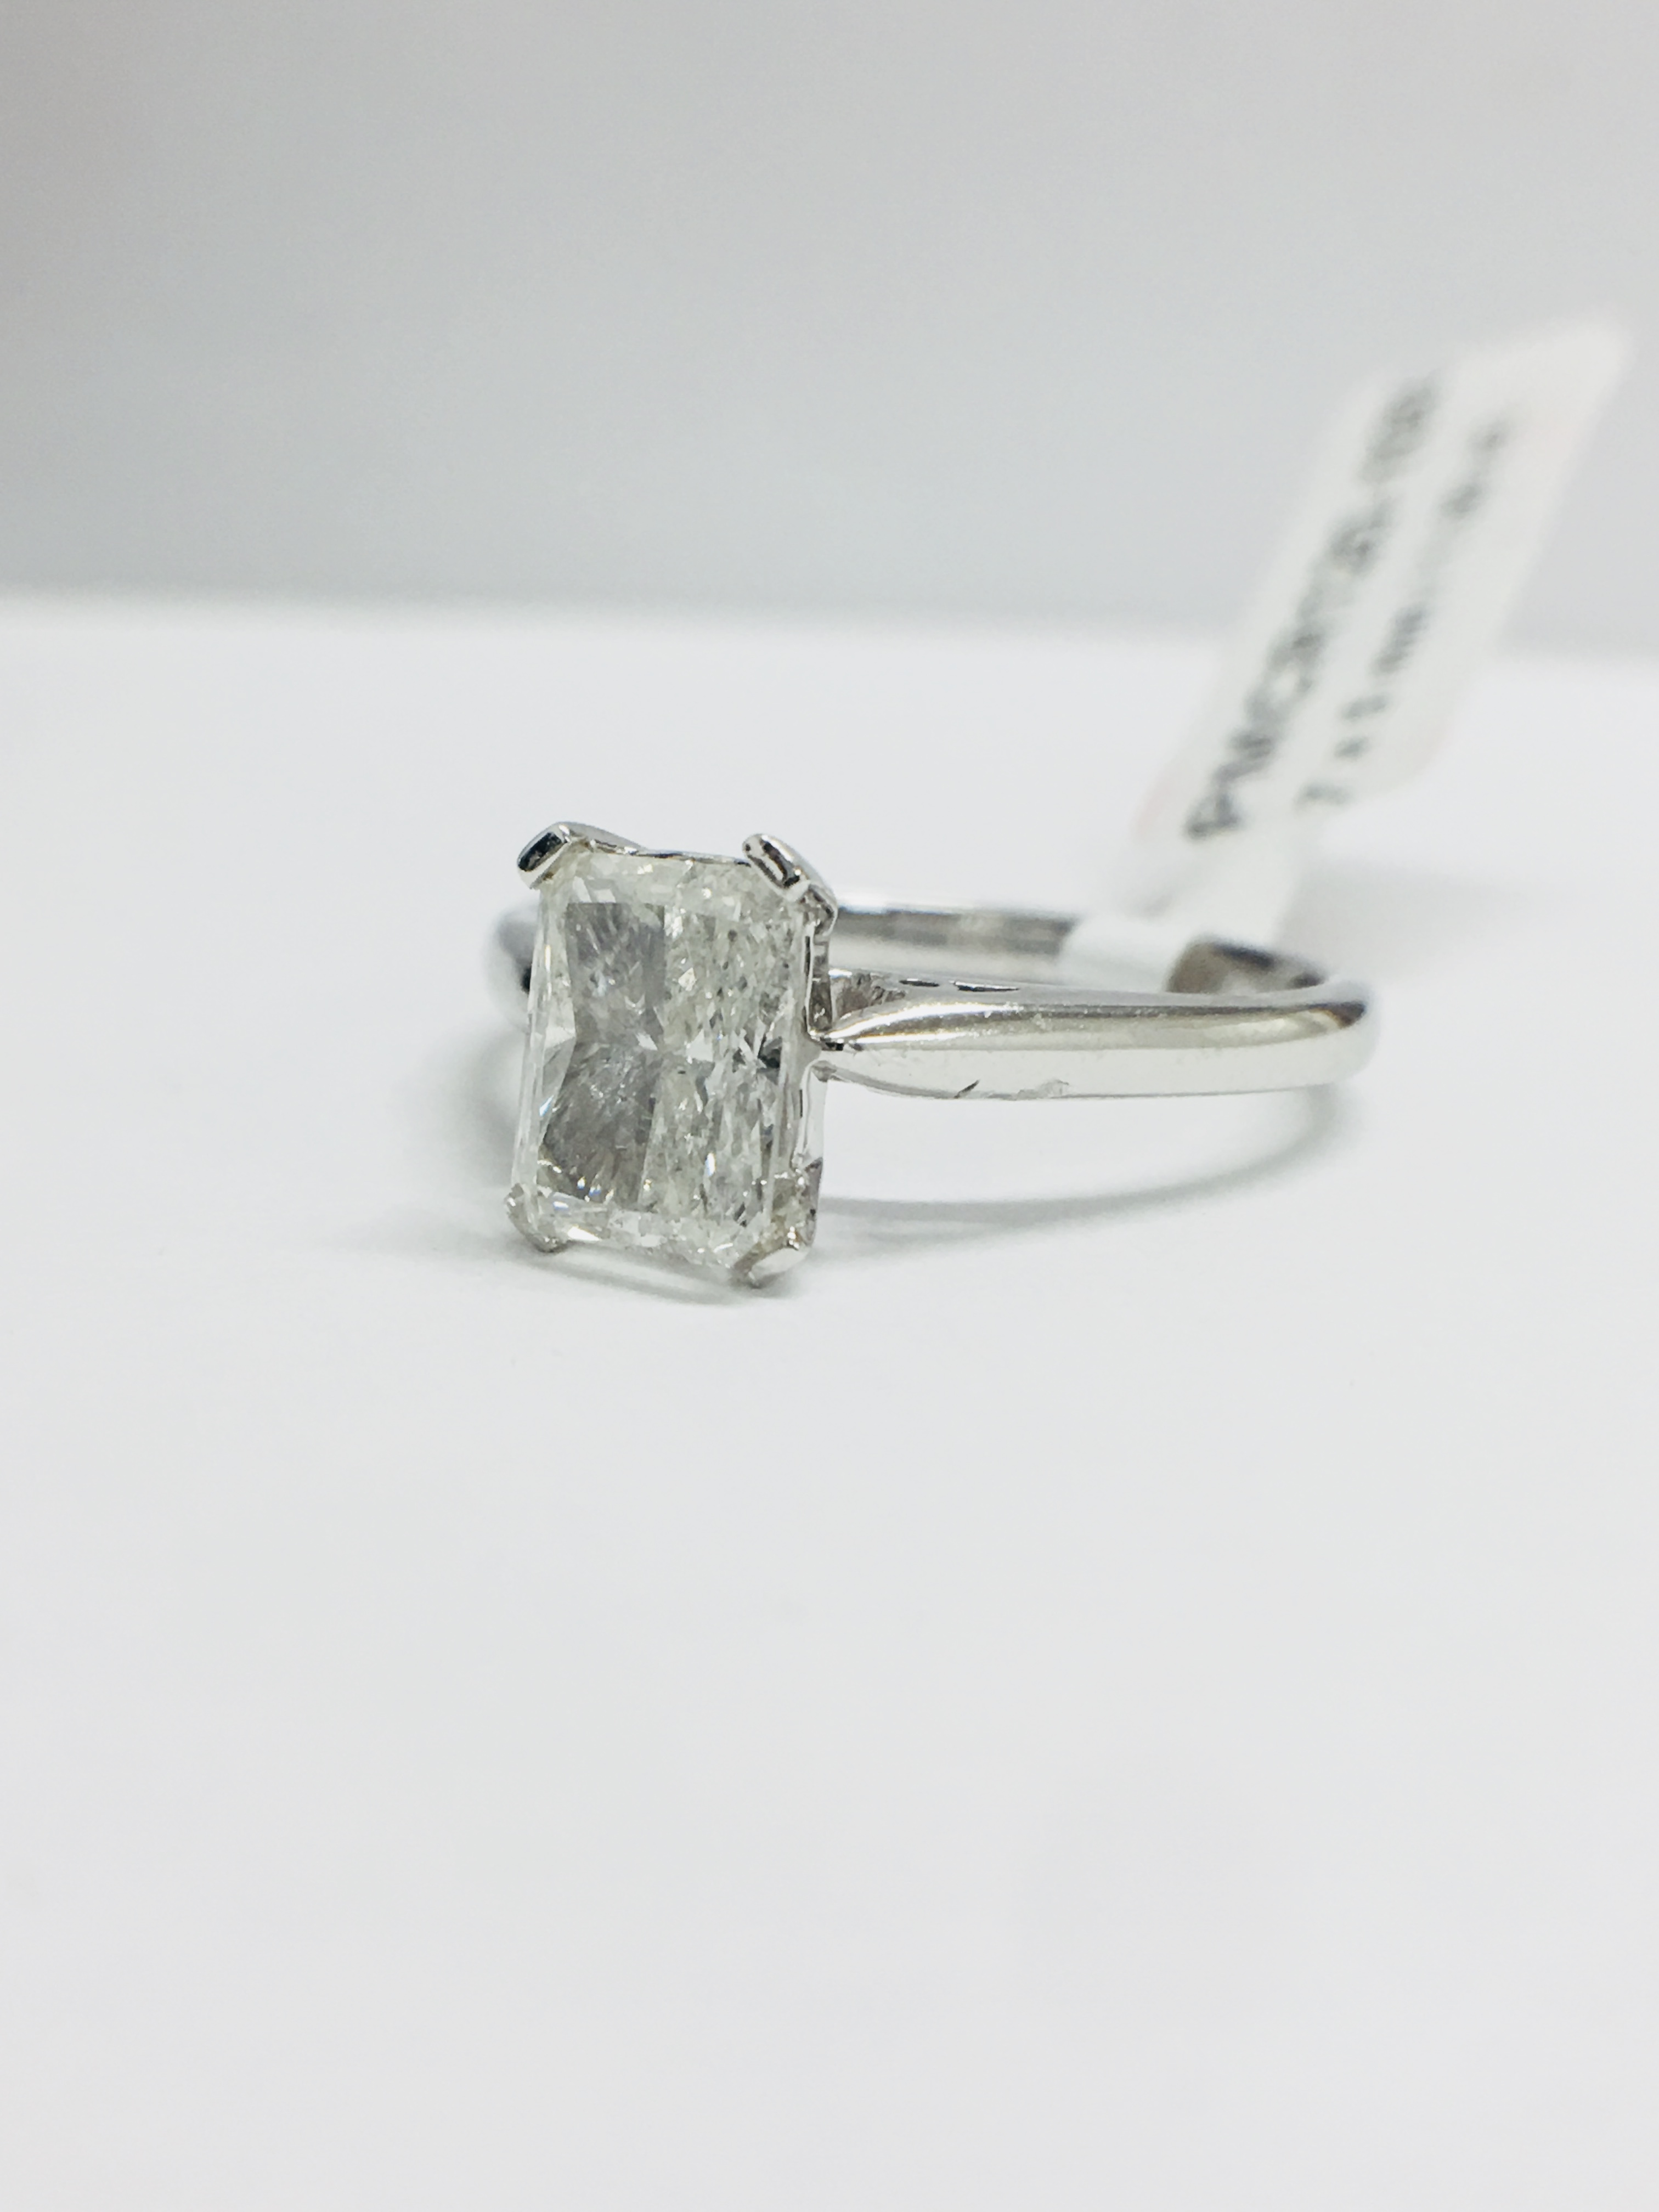 1Ct Cushion Cut Diamond Solitaire Ring In A Diamond Set Mount, - Image 7 of 11